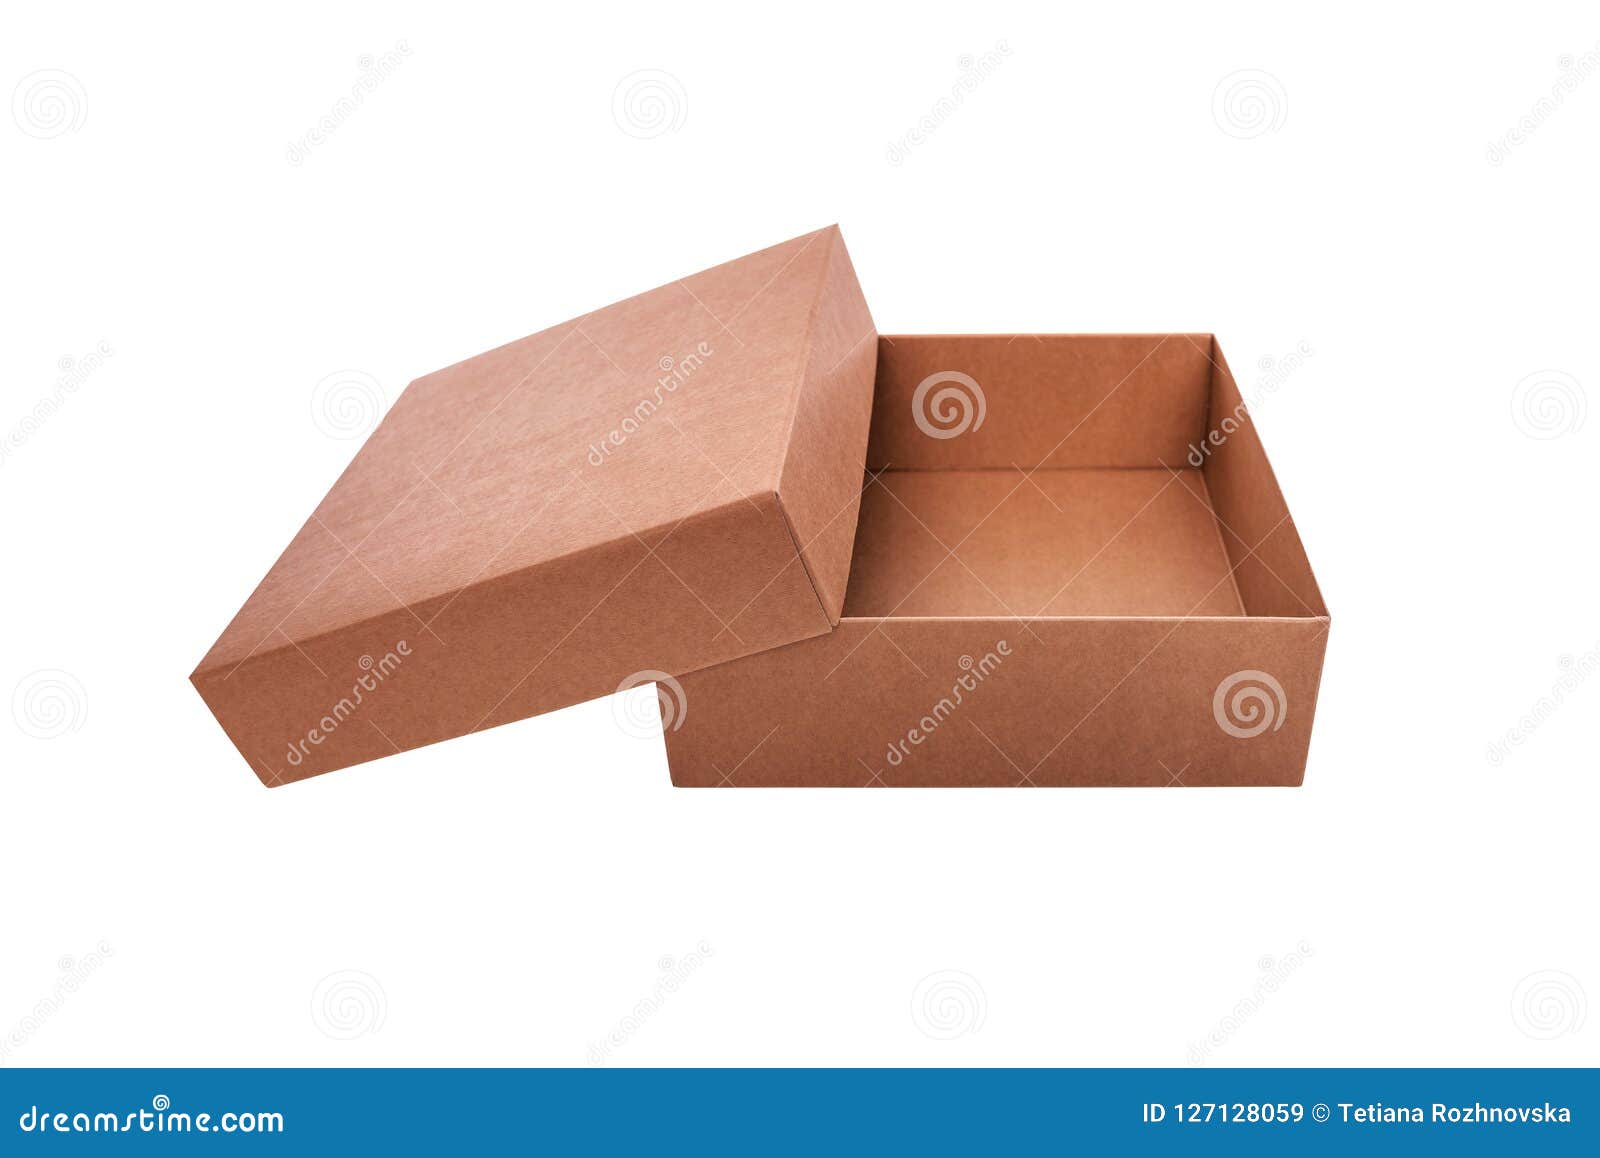 Download Cardboard Box With An Open Lid. Close-up. Stock Image ...